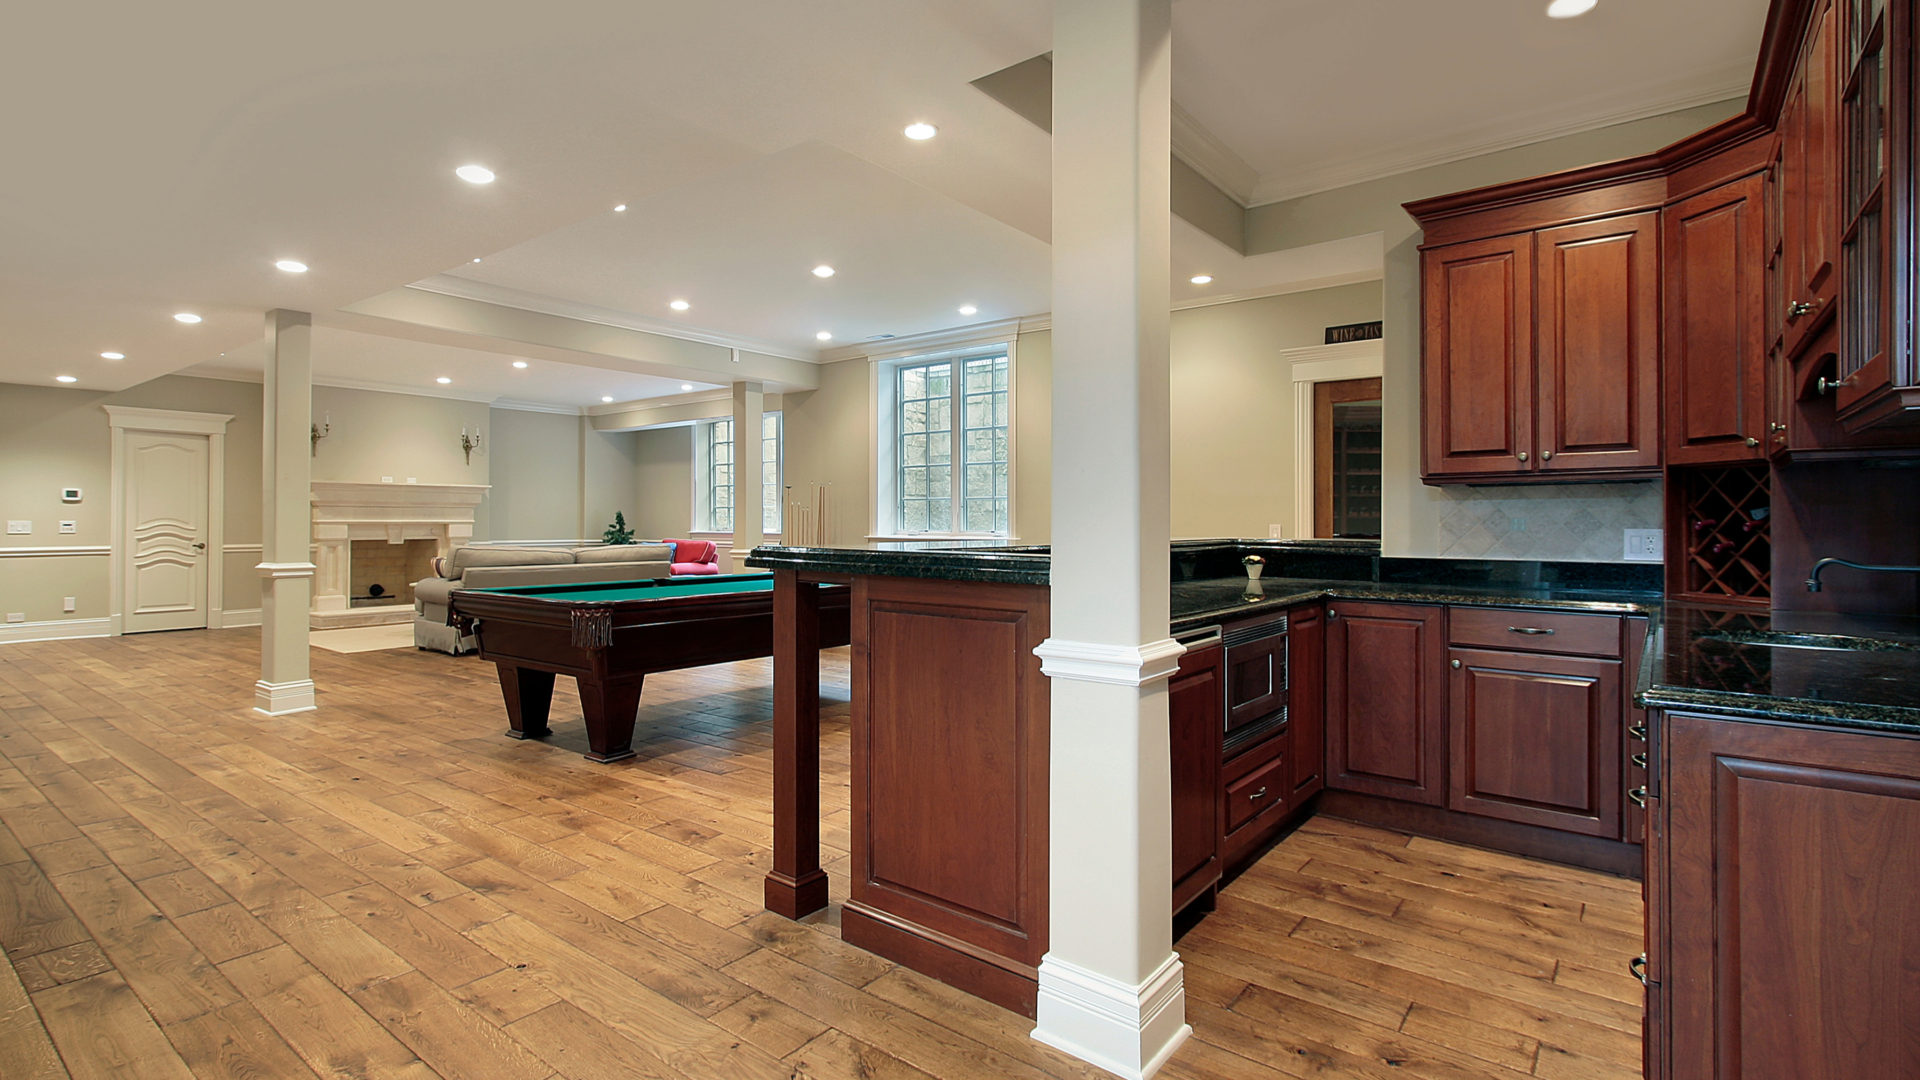 A finished basement with a kitchen in the corner and a pool table in the middle